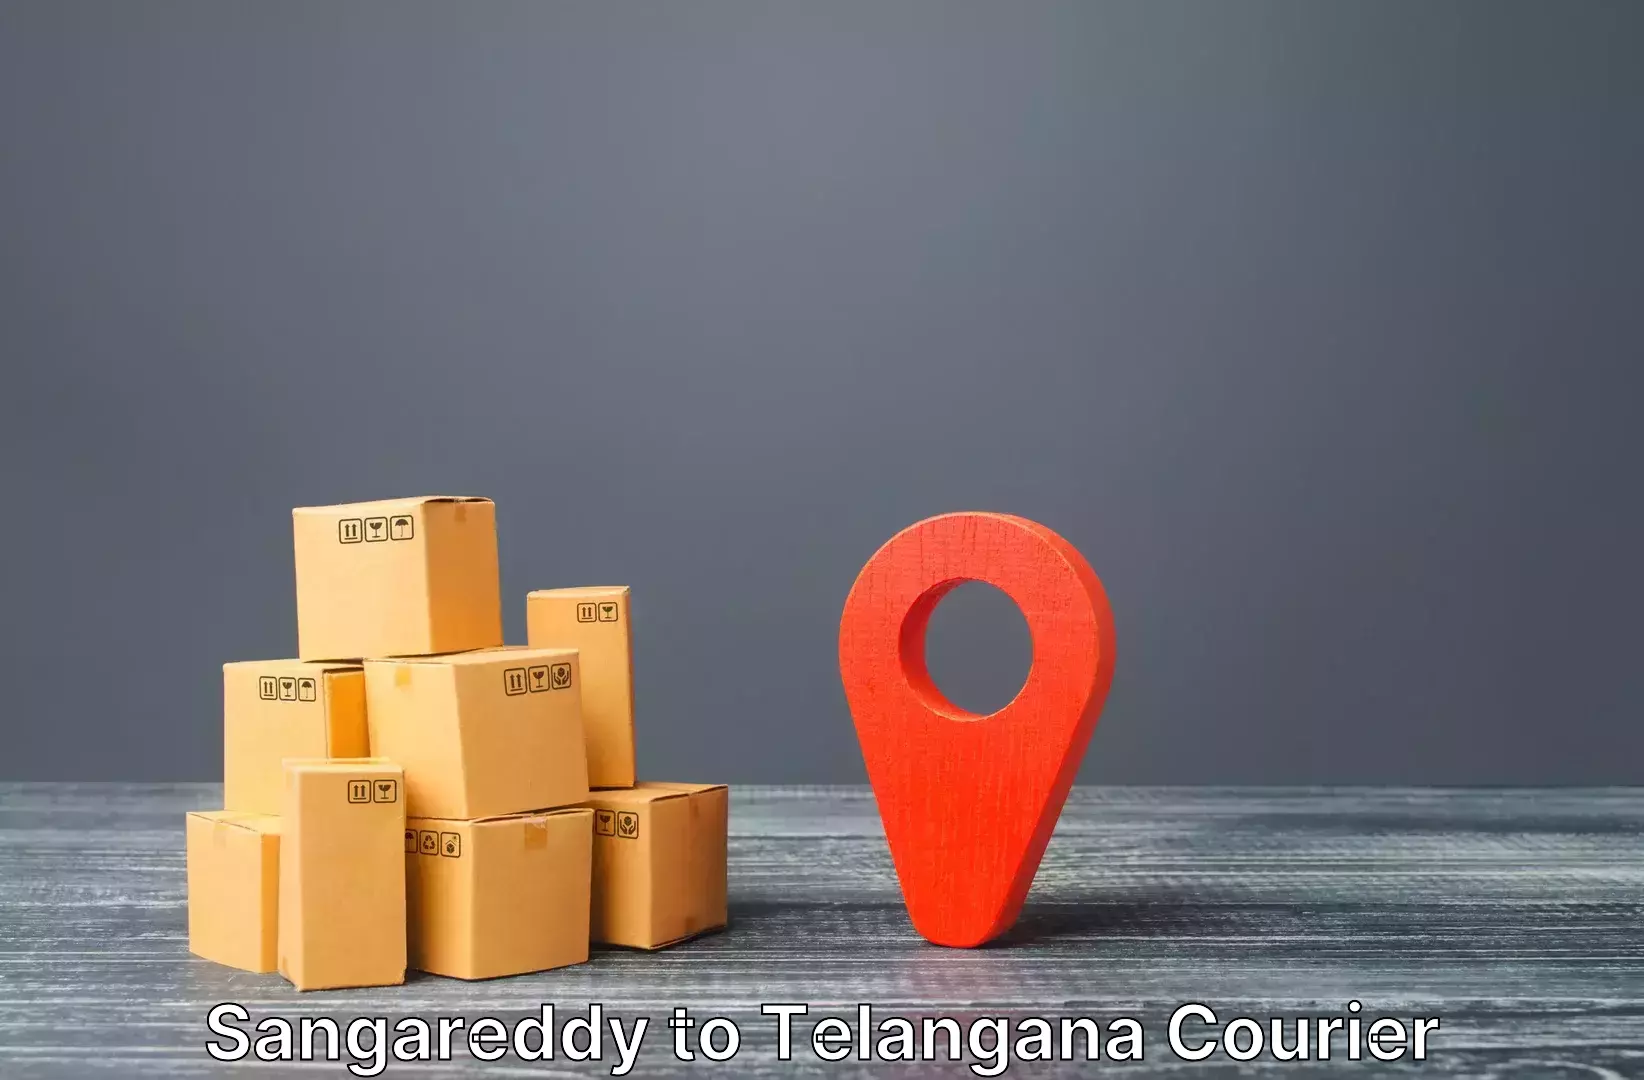 Luggage delivery logistics in Sangareddy to Tadoor